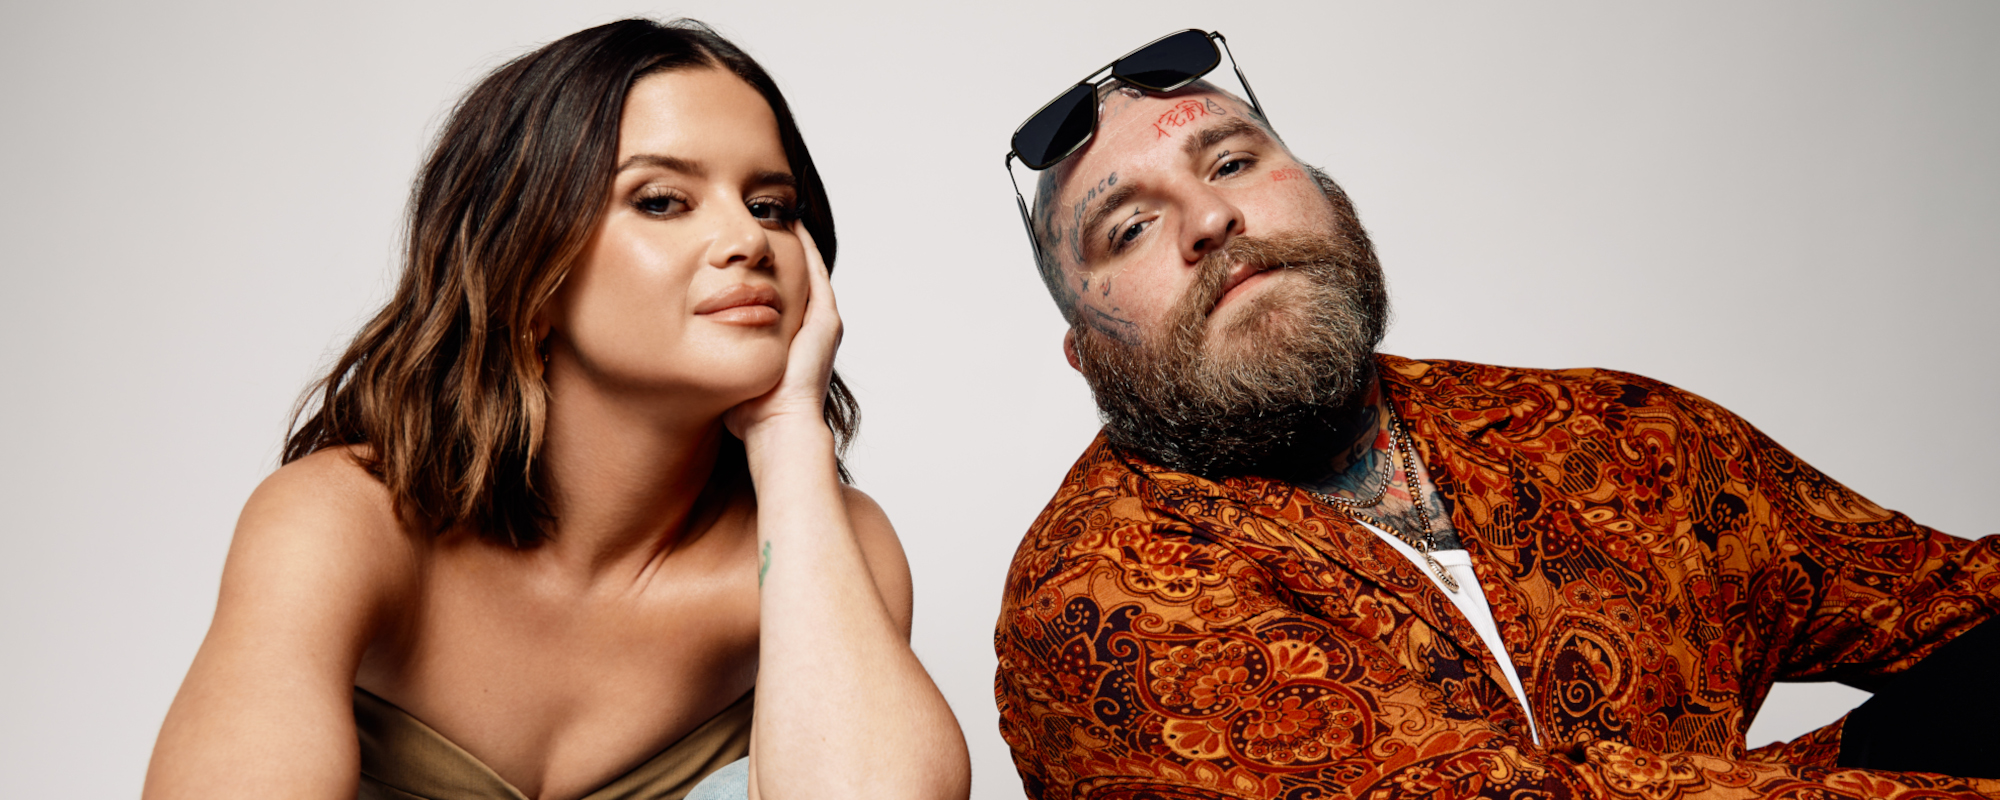 Maren Morris Joins Forces with Teddy Swims on “Some Things I’ll Never Know”